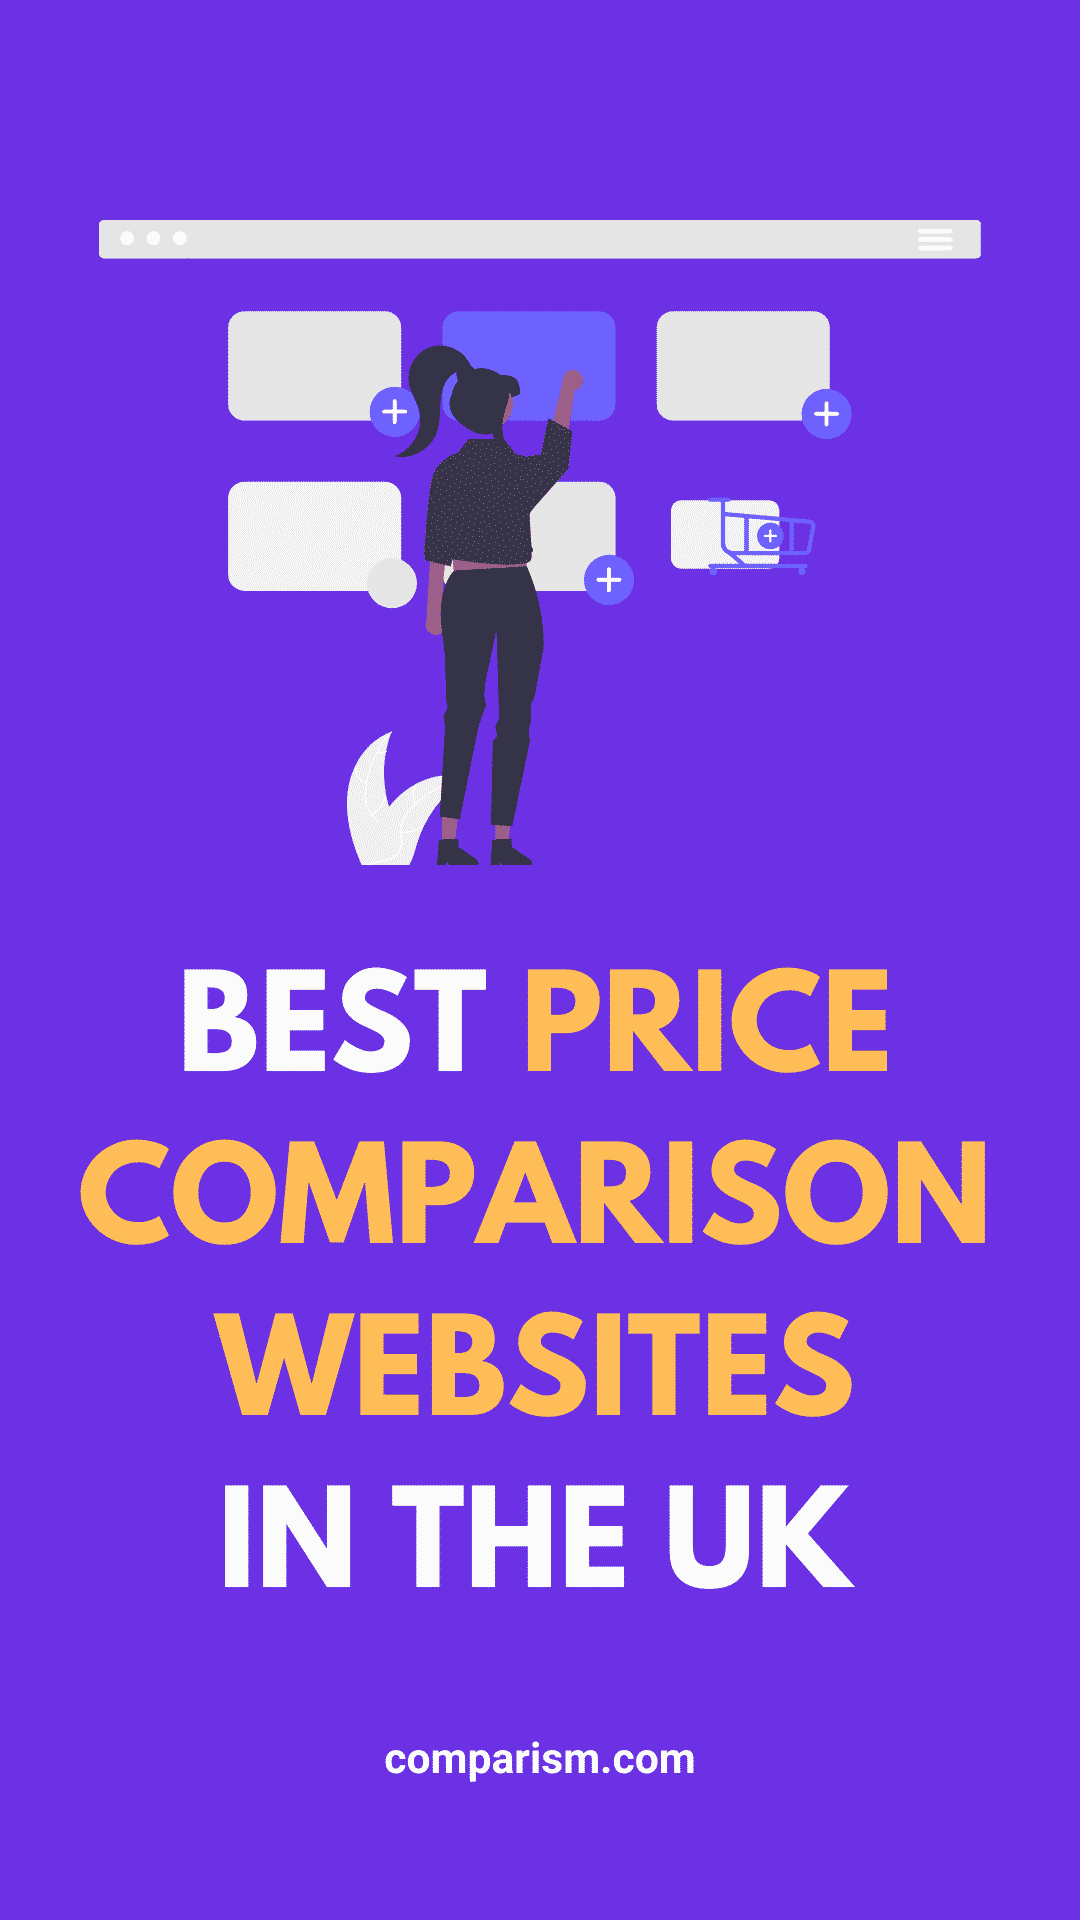 Best Price Comparison Websites in the UK for 2022